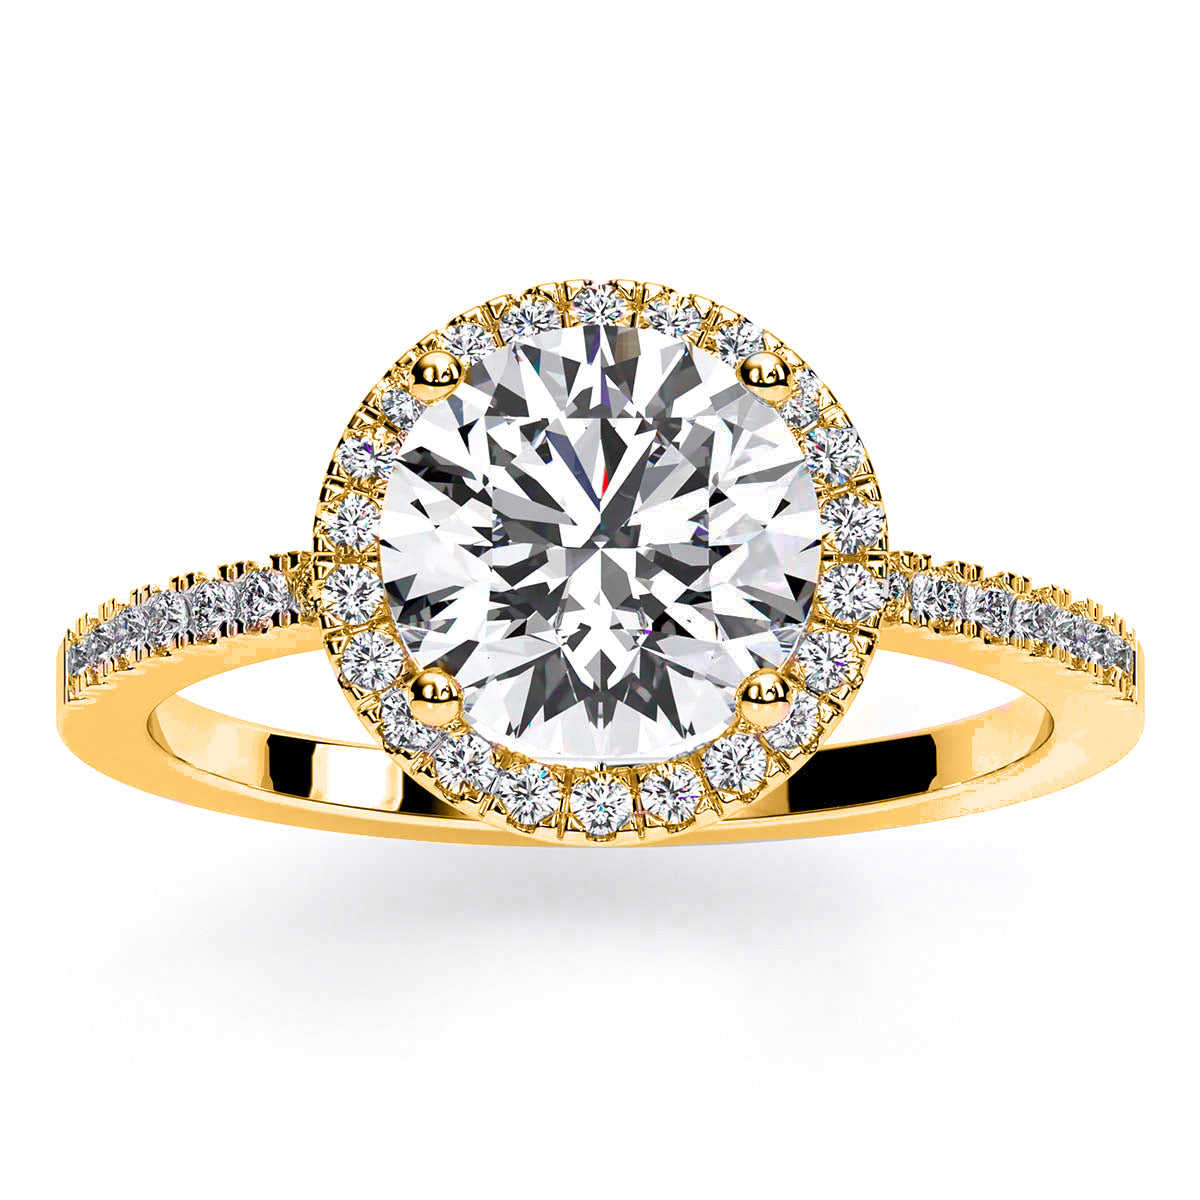 bergenia - round diamond engagement ring 14k yellow gold / 0.50 ct center - 0.87 ct total weight / high quality: clarity vs2 | c